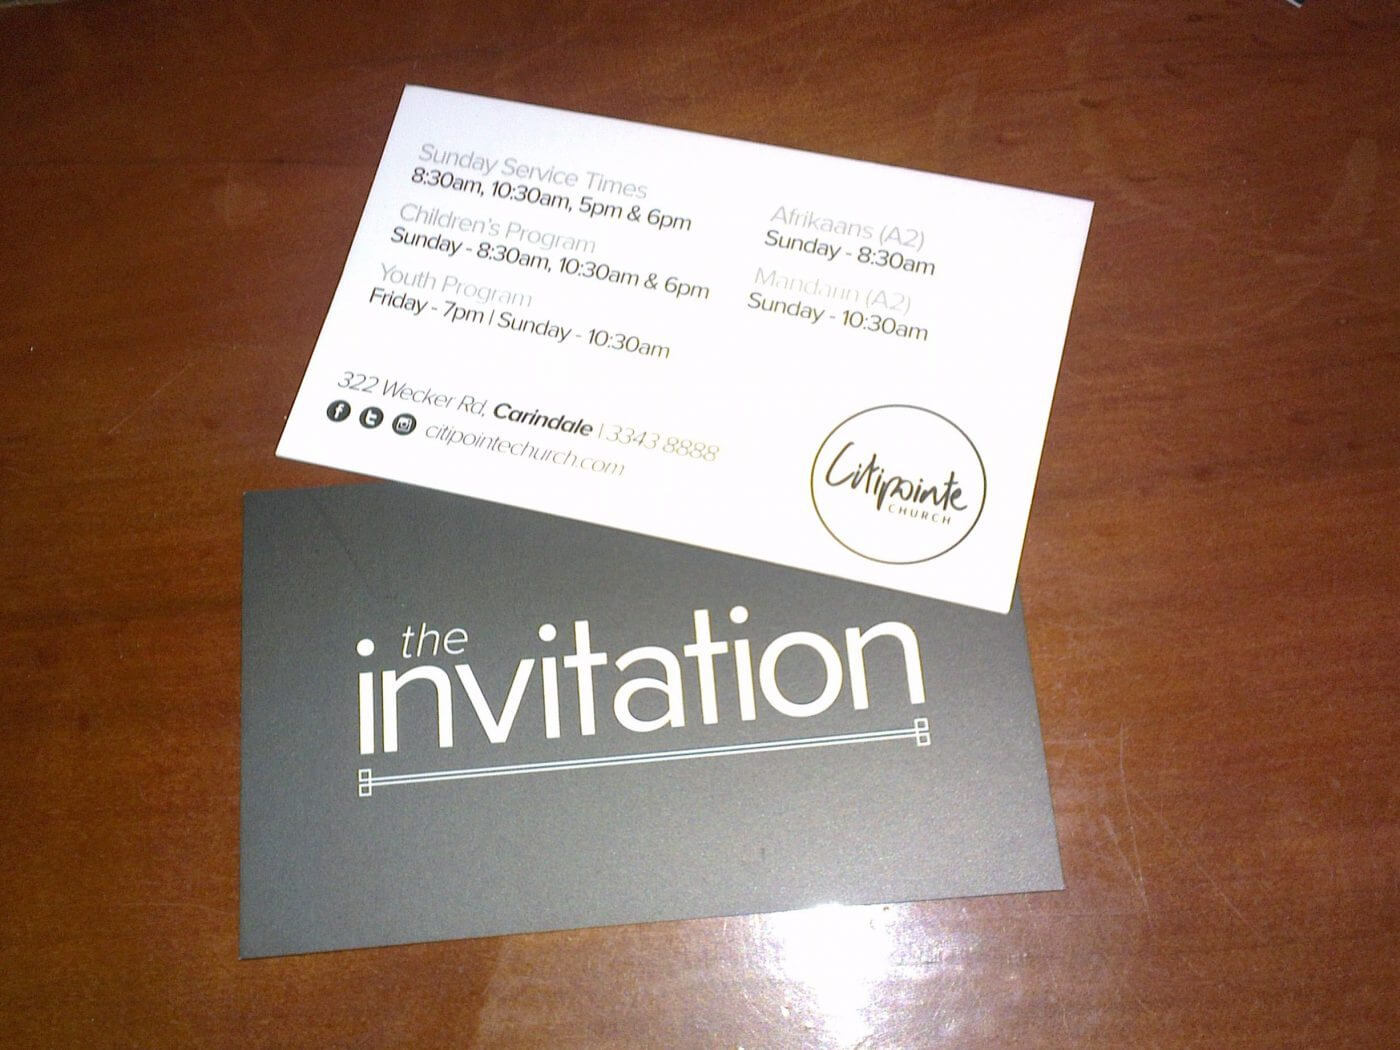 002 Church Invitation Cards Templates Template Ideas For Christian Business Cards Templates Free